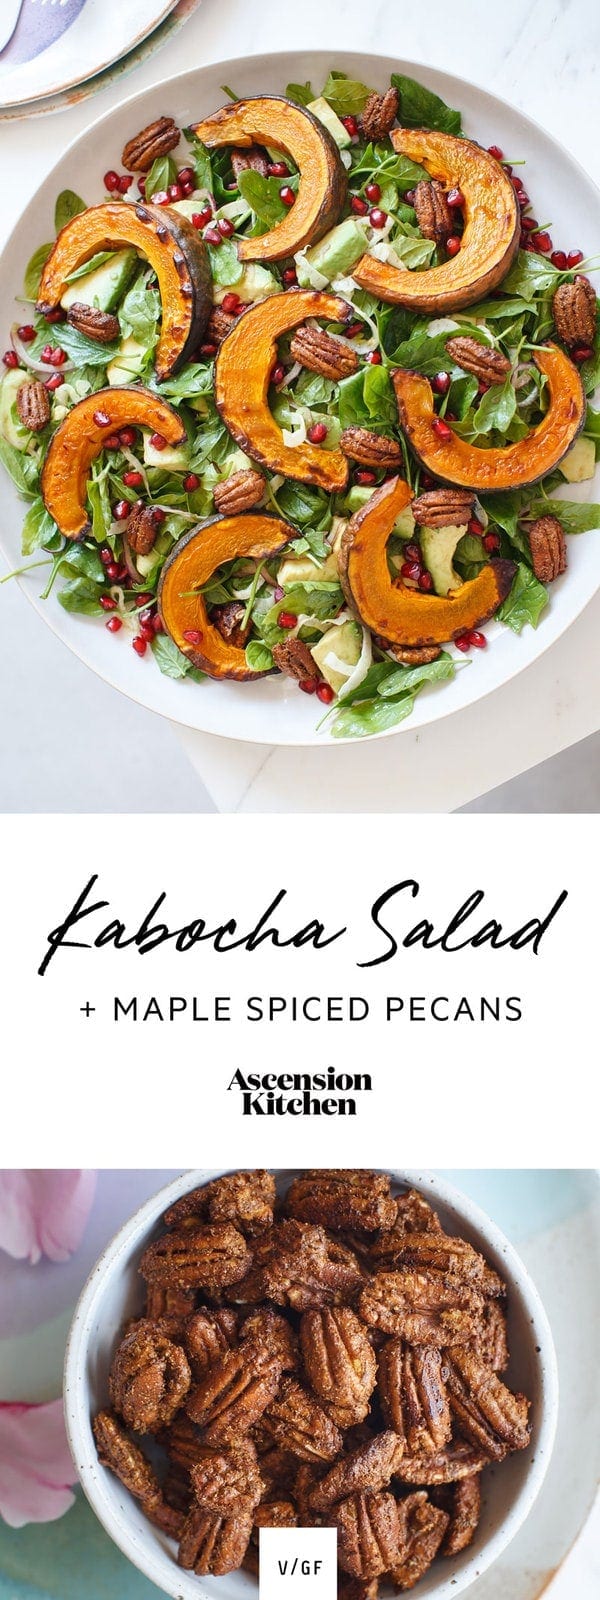 A simple kabocha squash salad with maple spiced pecans. Vegan and gluten free. #ChristmasSalad #SquashSalad #Squashes #SpicedPecans #RoastedSquash #KabochaSalad #AscensionKitchen // Pin to your own inspiration board! //